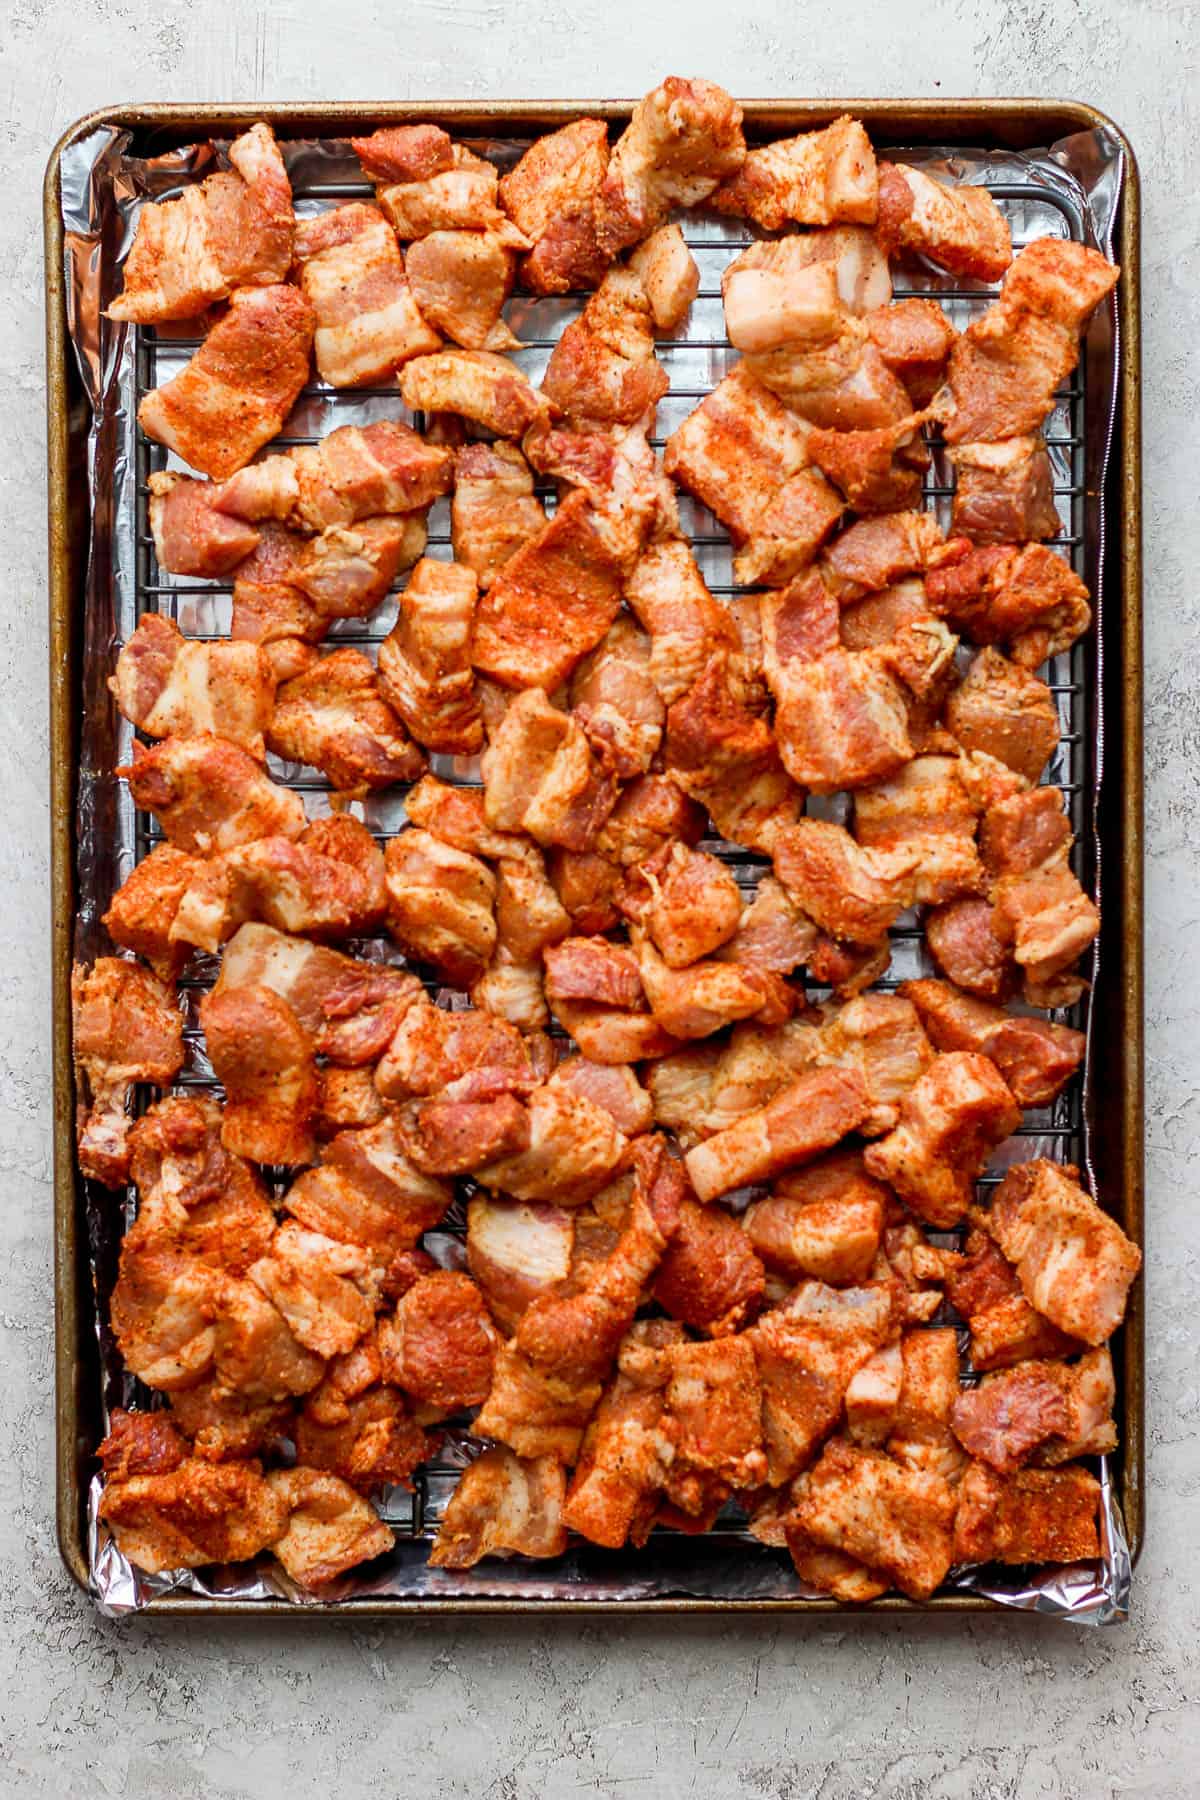 Seasoned pork belly pieces on a wire rack on top of a foil-lined baking sheet.